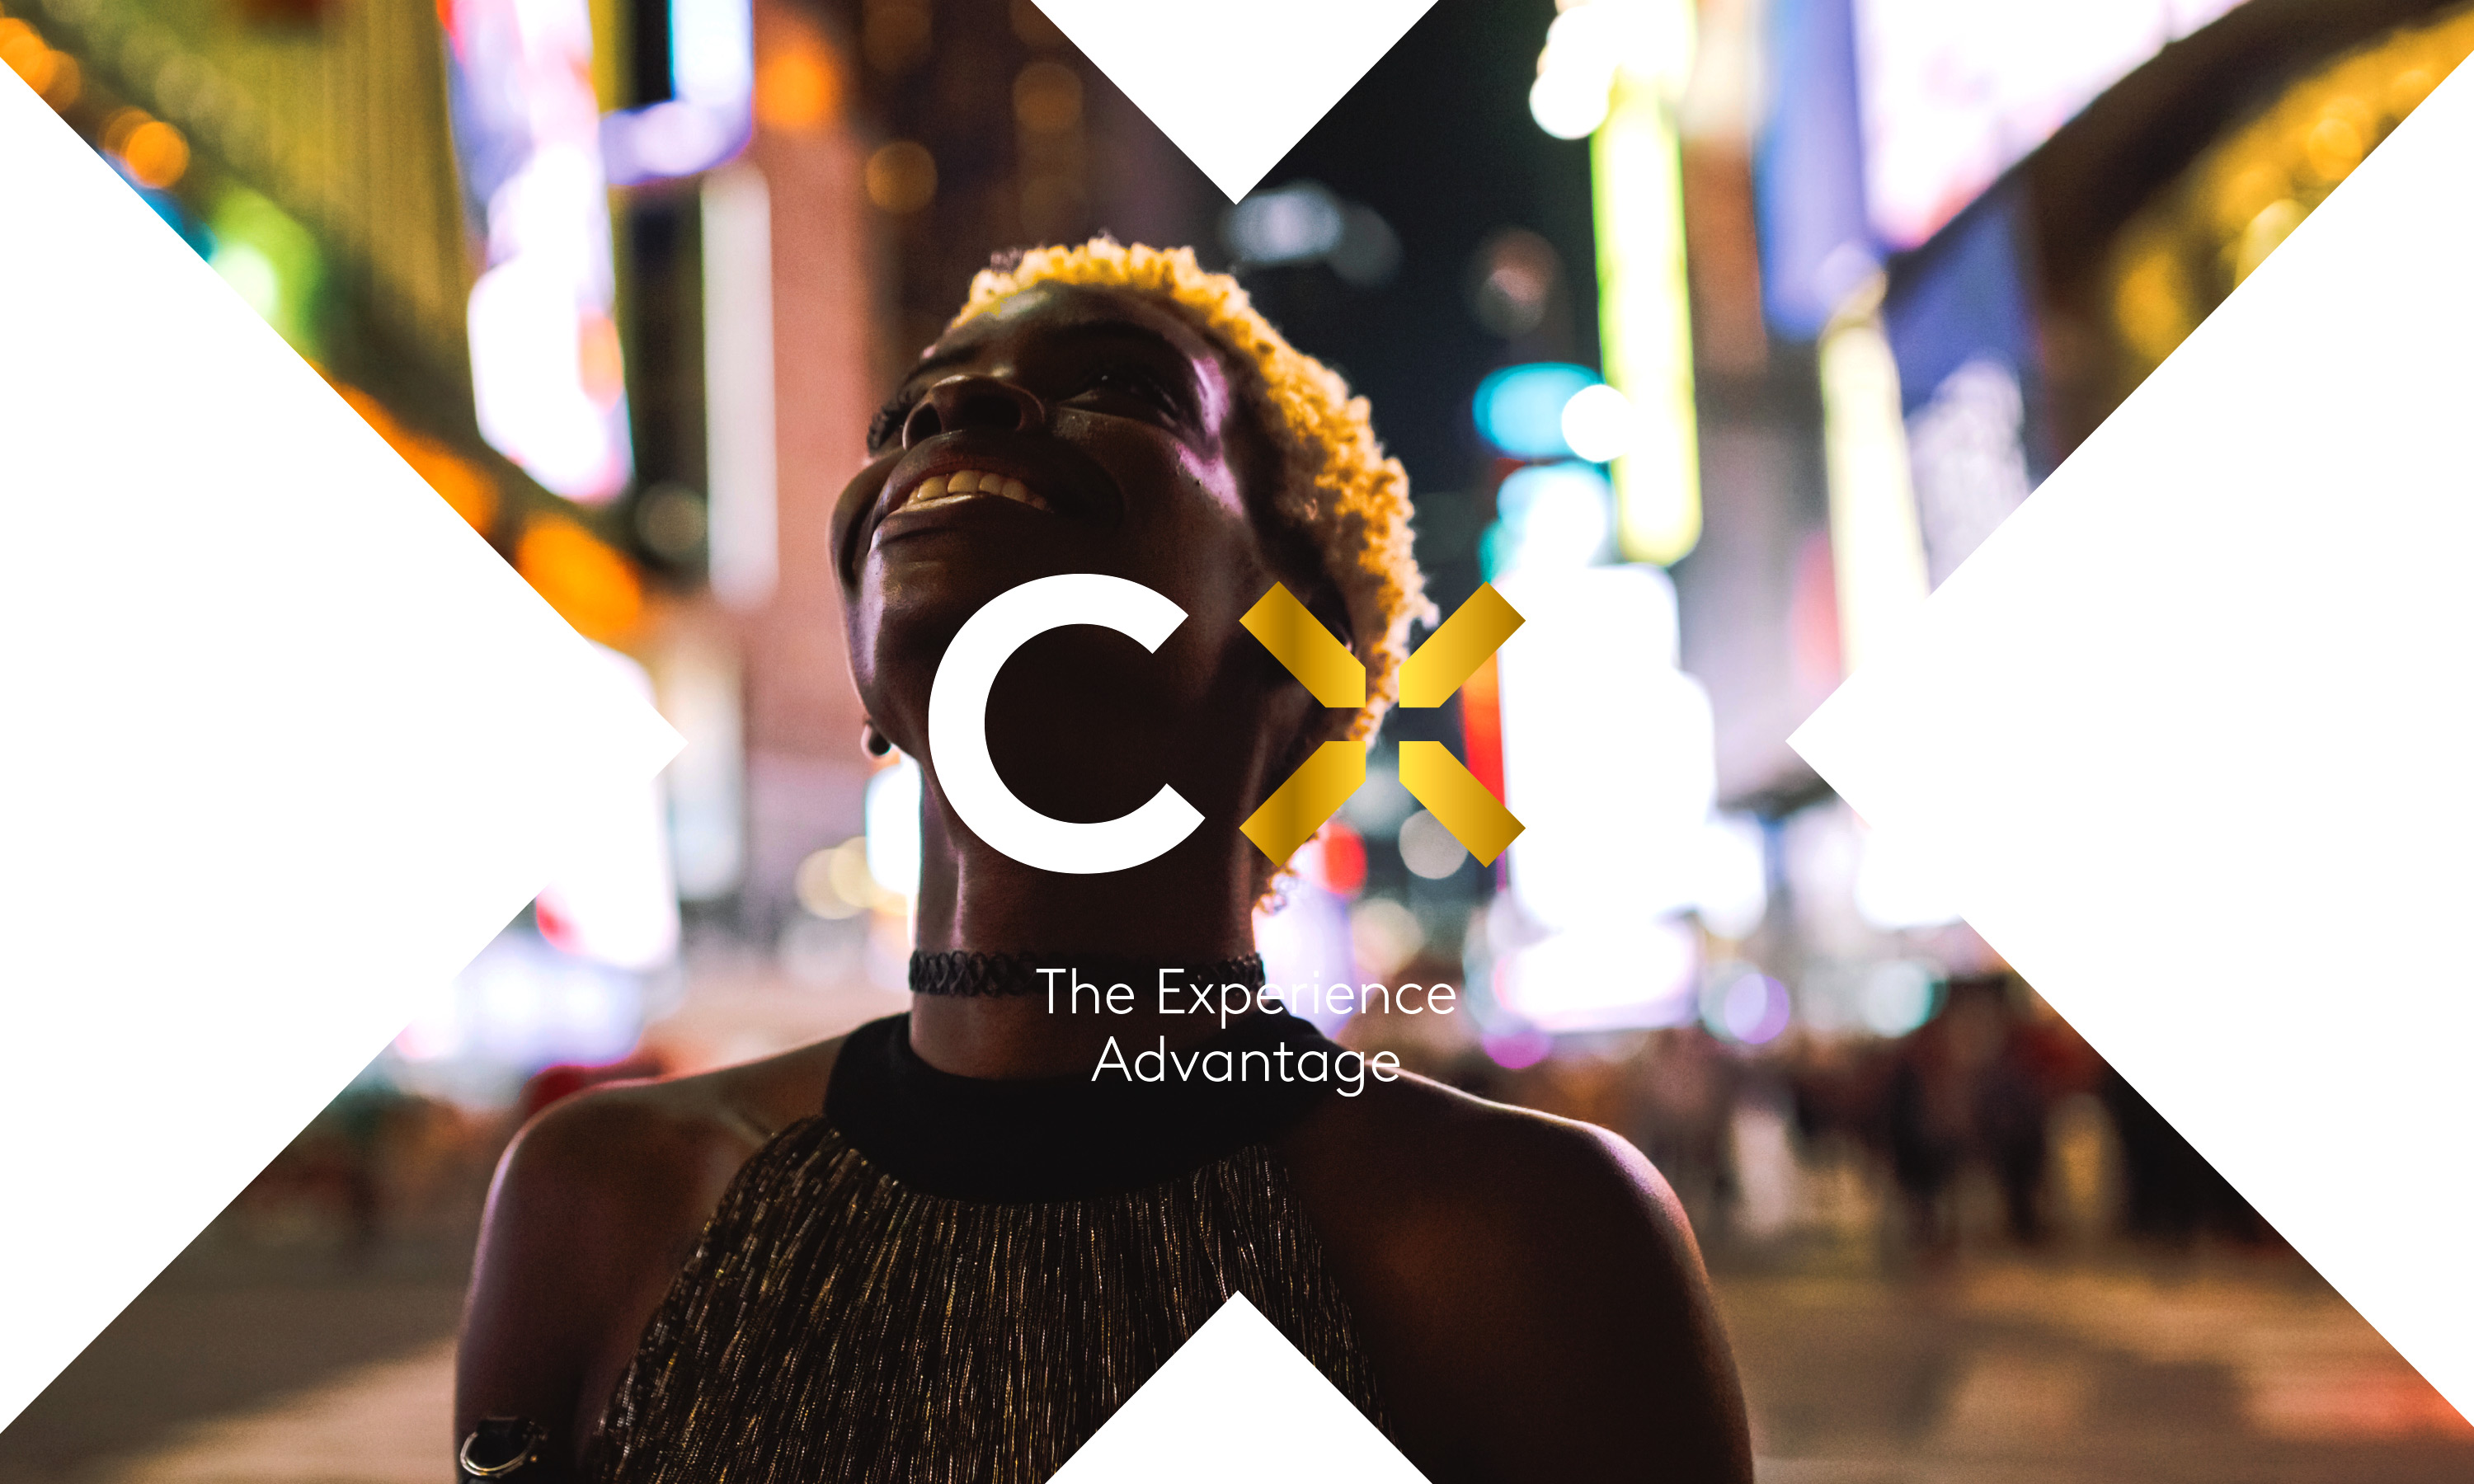 Branding by Neon Kantar CX+ brand mark with strapline over image NYC image with girl looking up